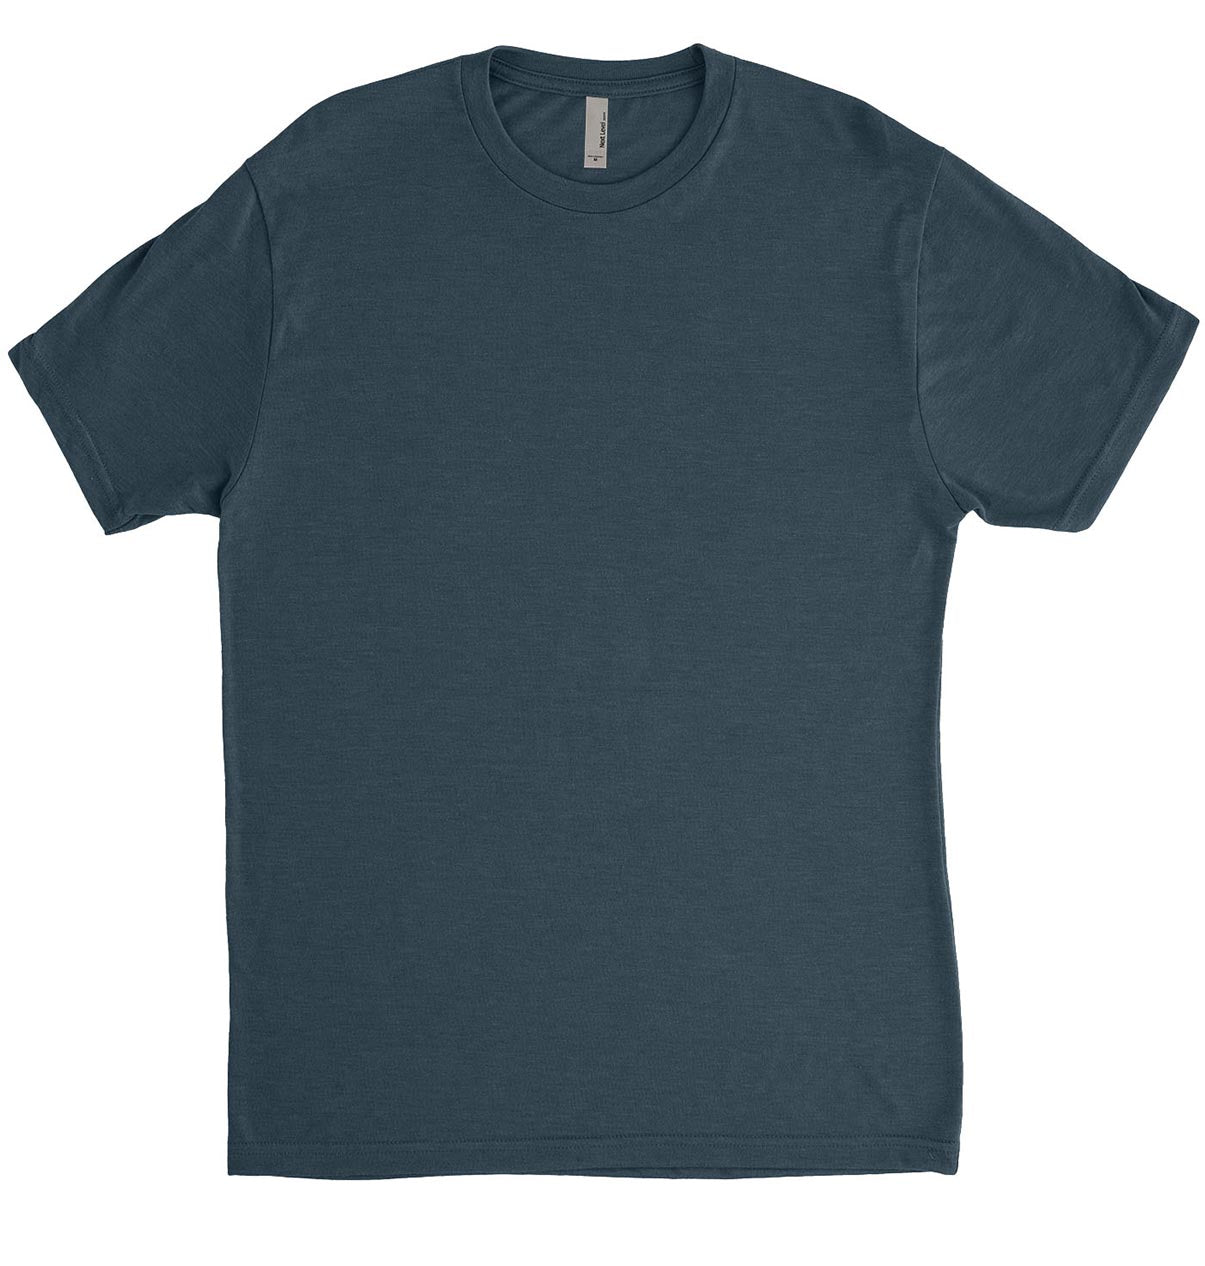 WOOD OAKS NEXT LEVEL UNISEX TRIBLEND TEE classic fit - humanKIND shop with a purpose